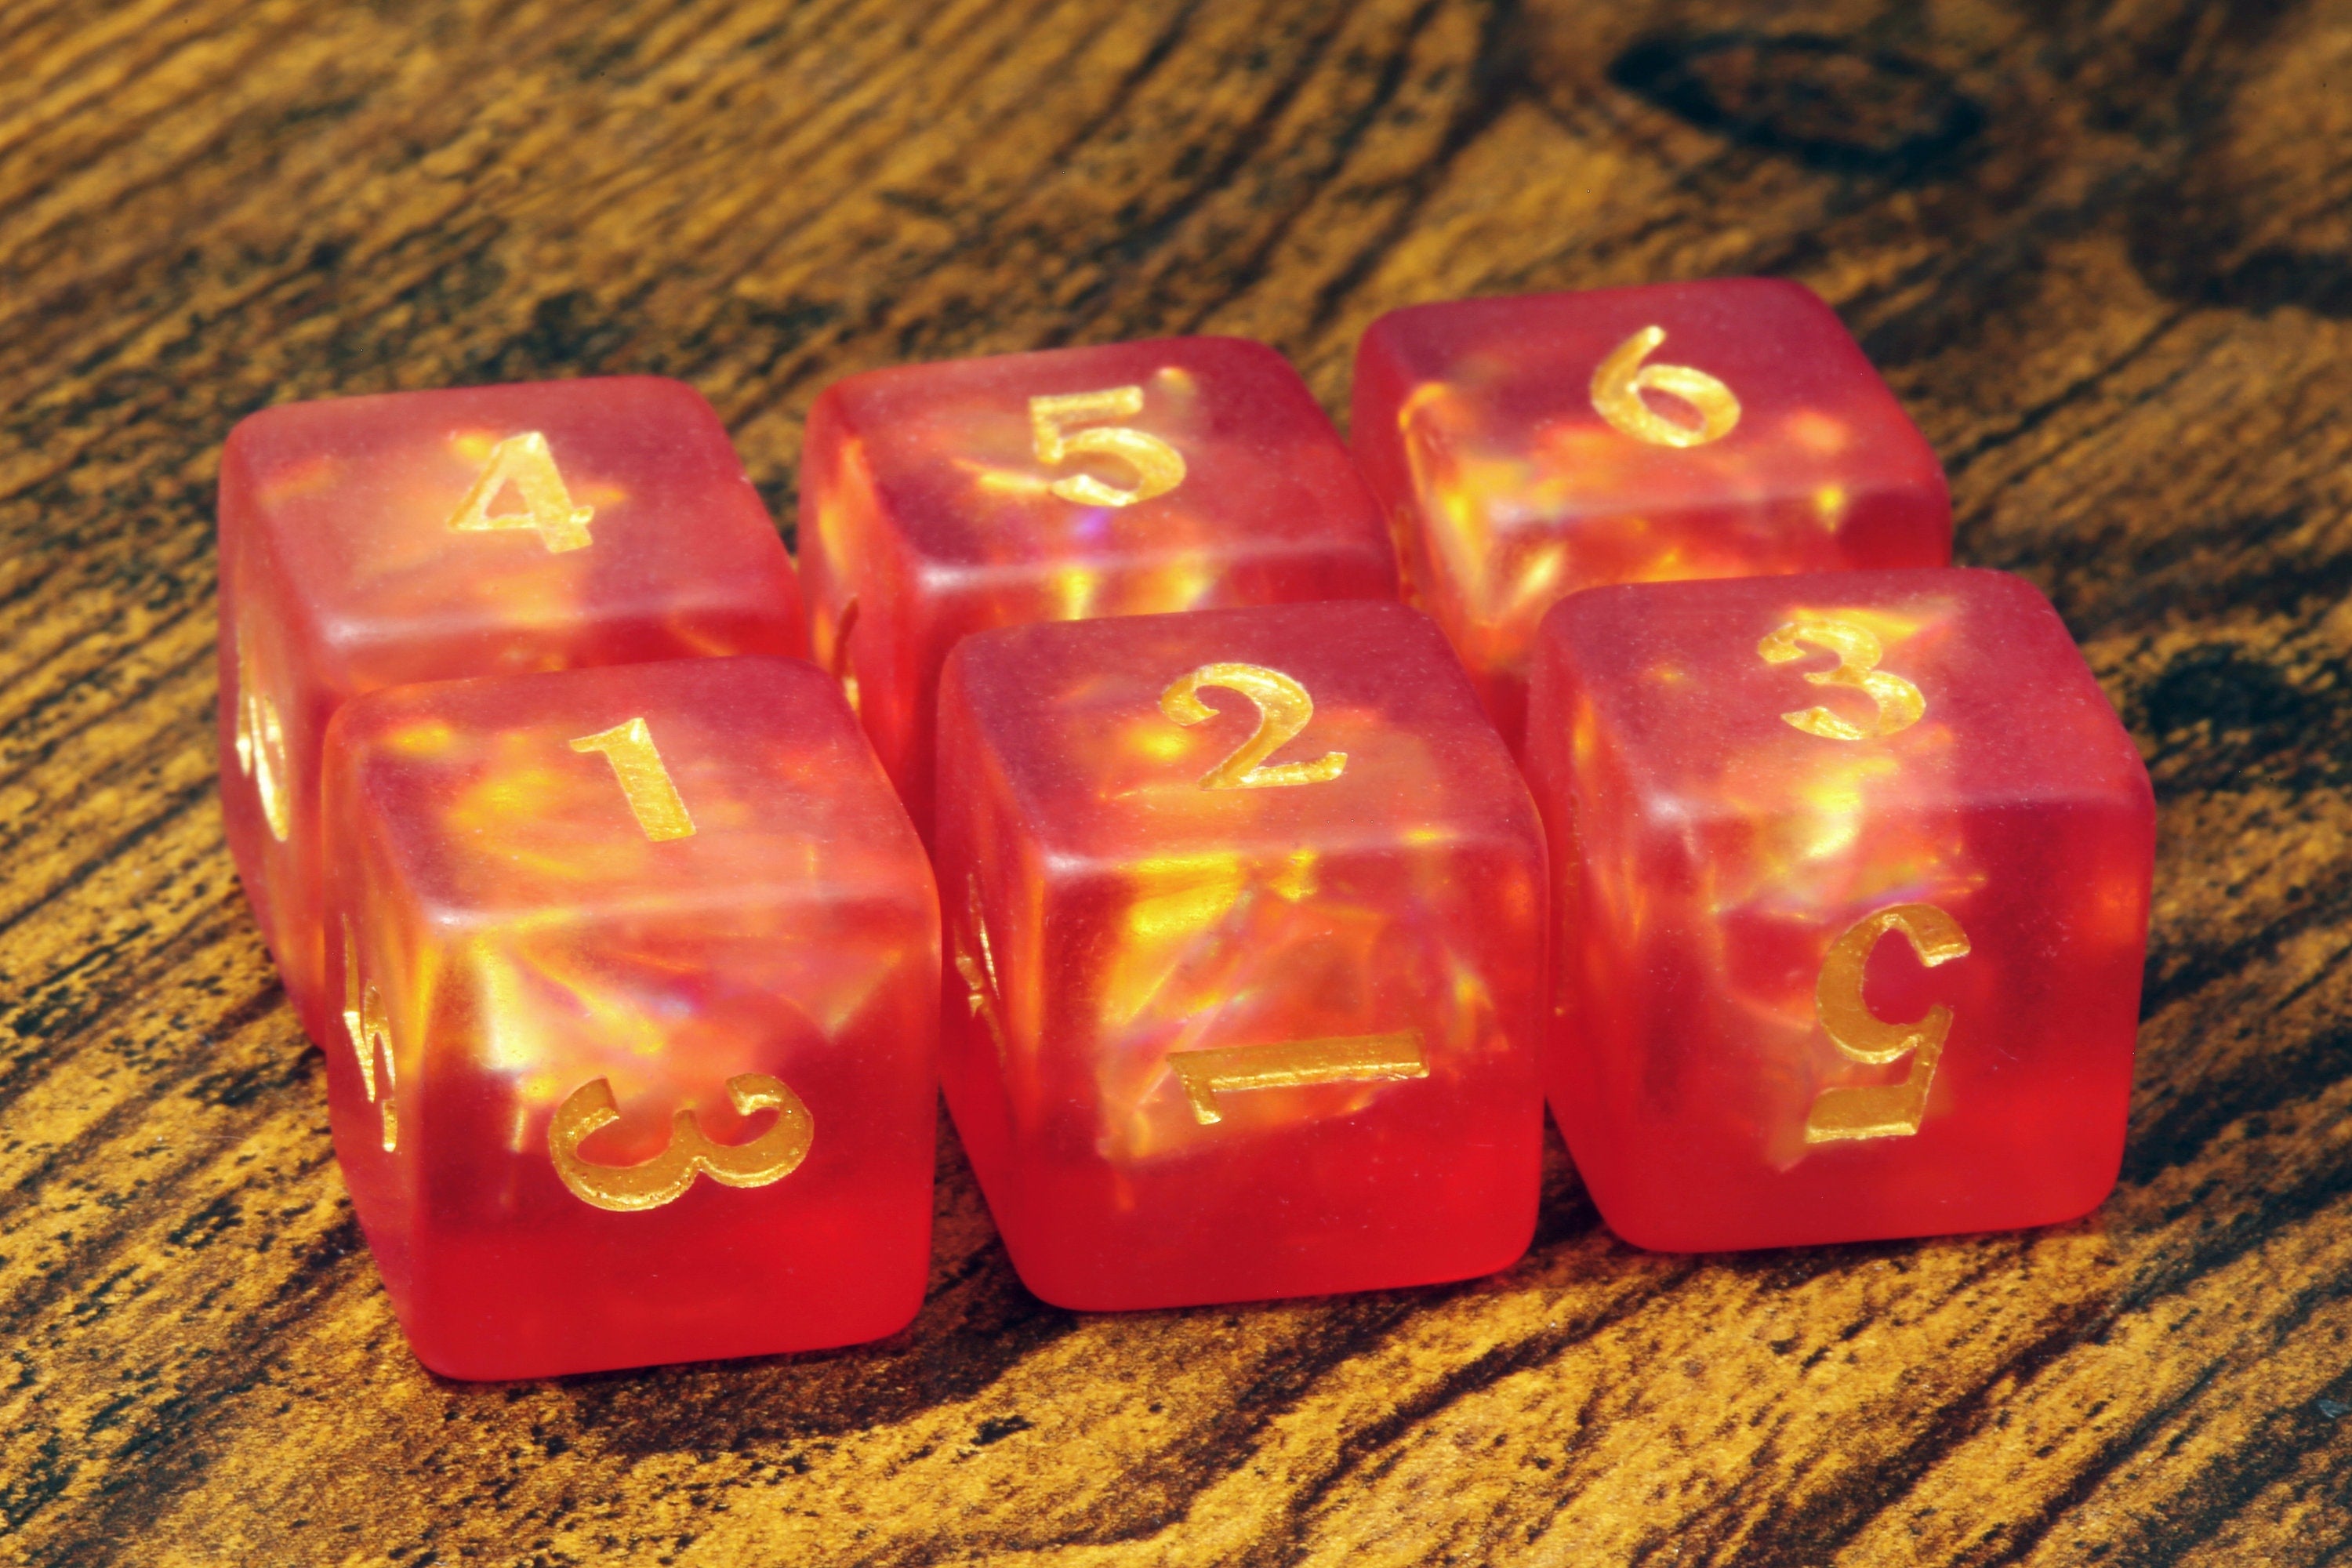 Dragon's Breath D6 dice - Red orange Holographic inclusions , Frosted